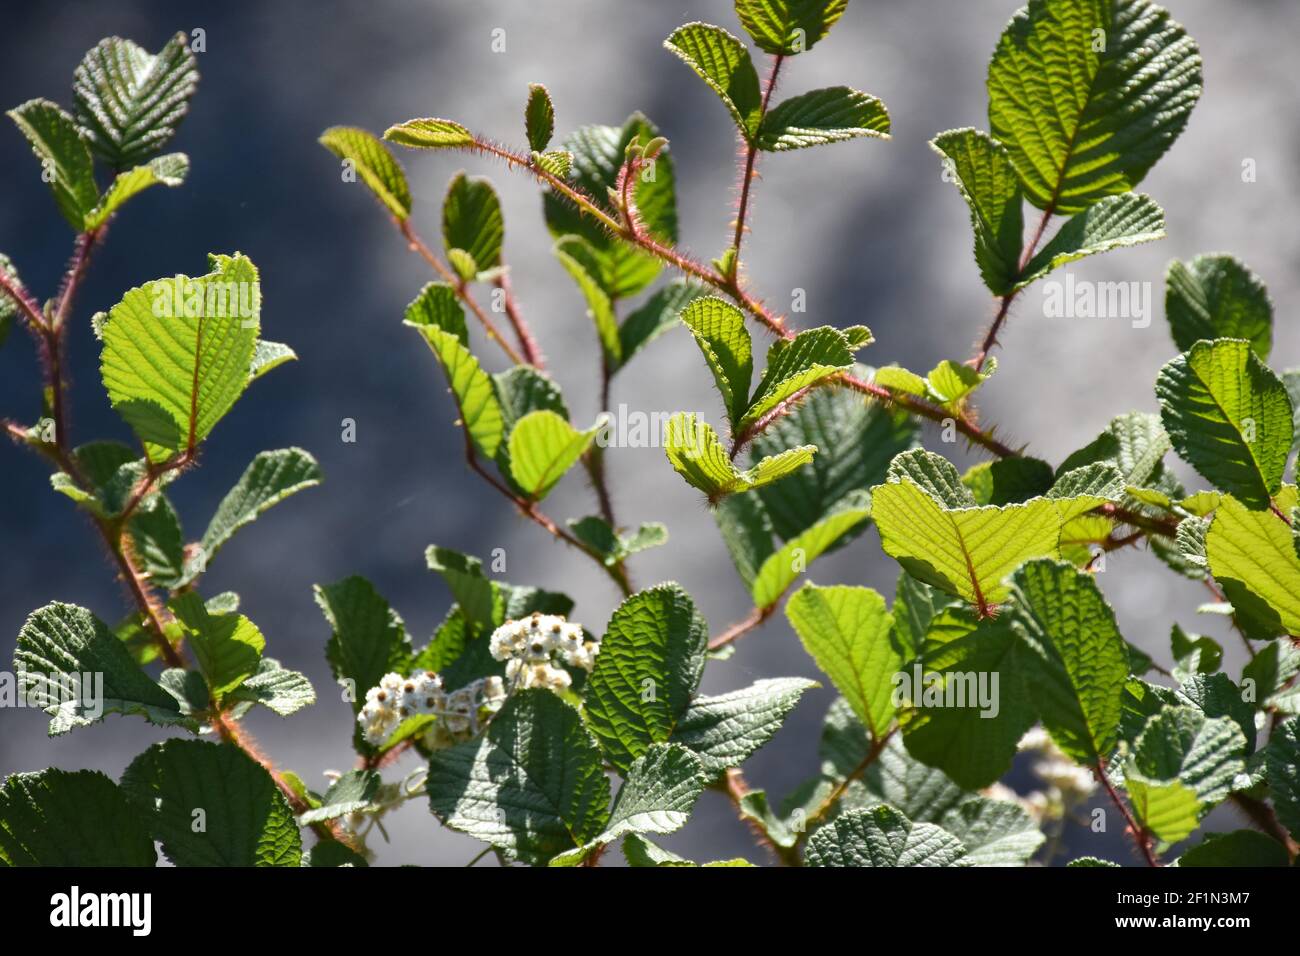 Himalayan Blackberry Plants Without berry: Invasive, Noxious, and Beautiful Stock Photo